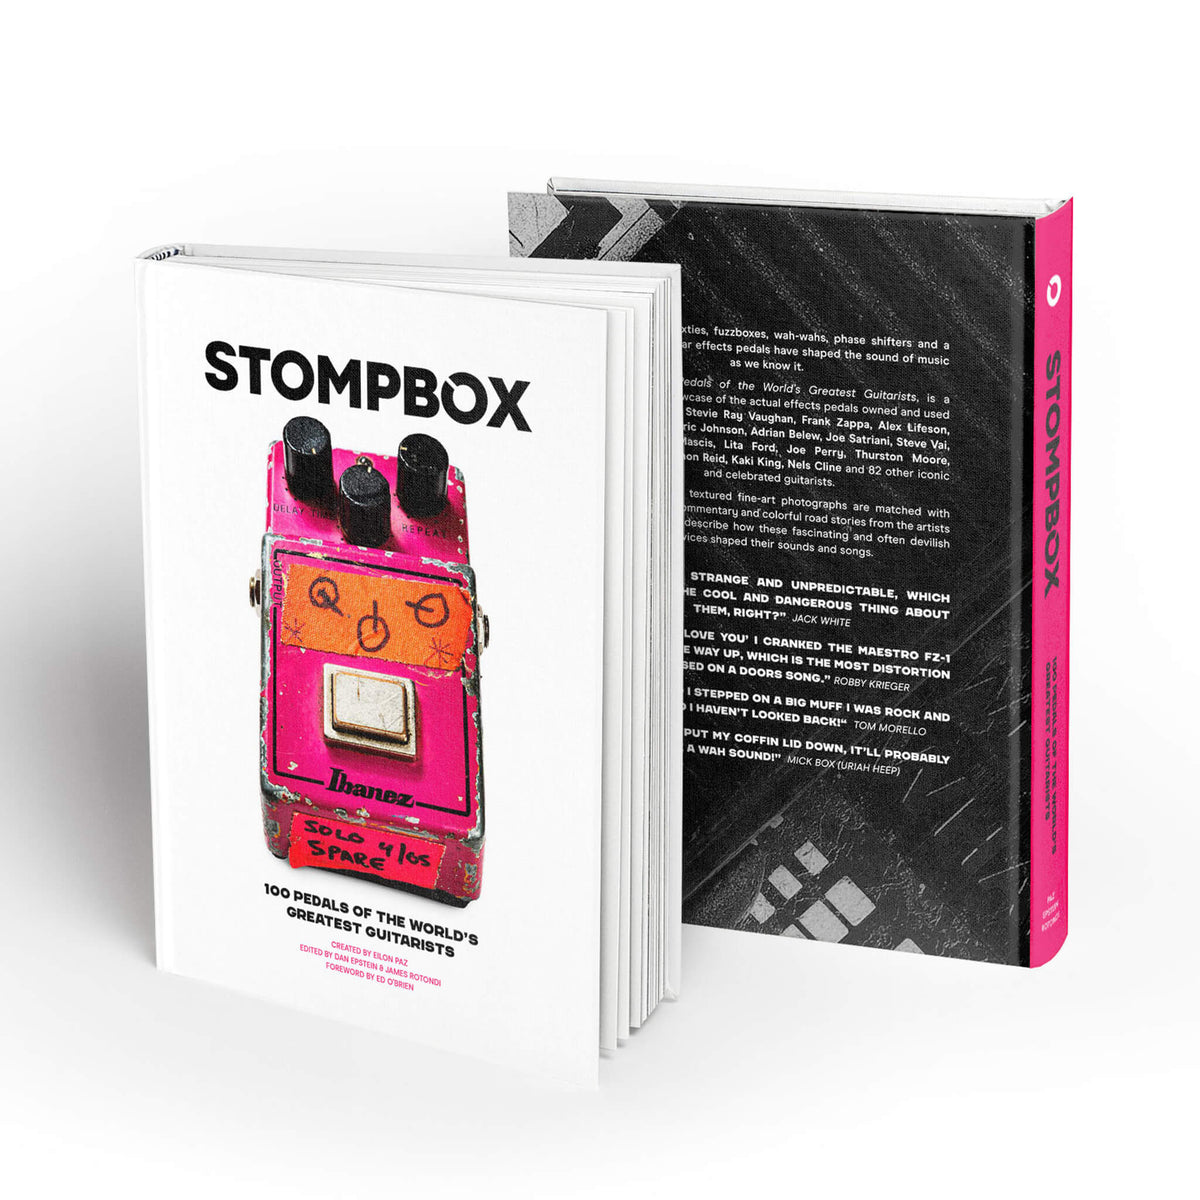 Stompbox 100 Pedals of the World’s Greatest Guitarists - Boost Guitar Pedals